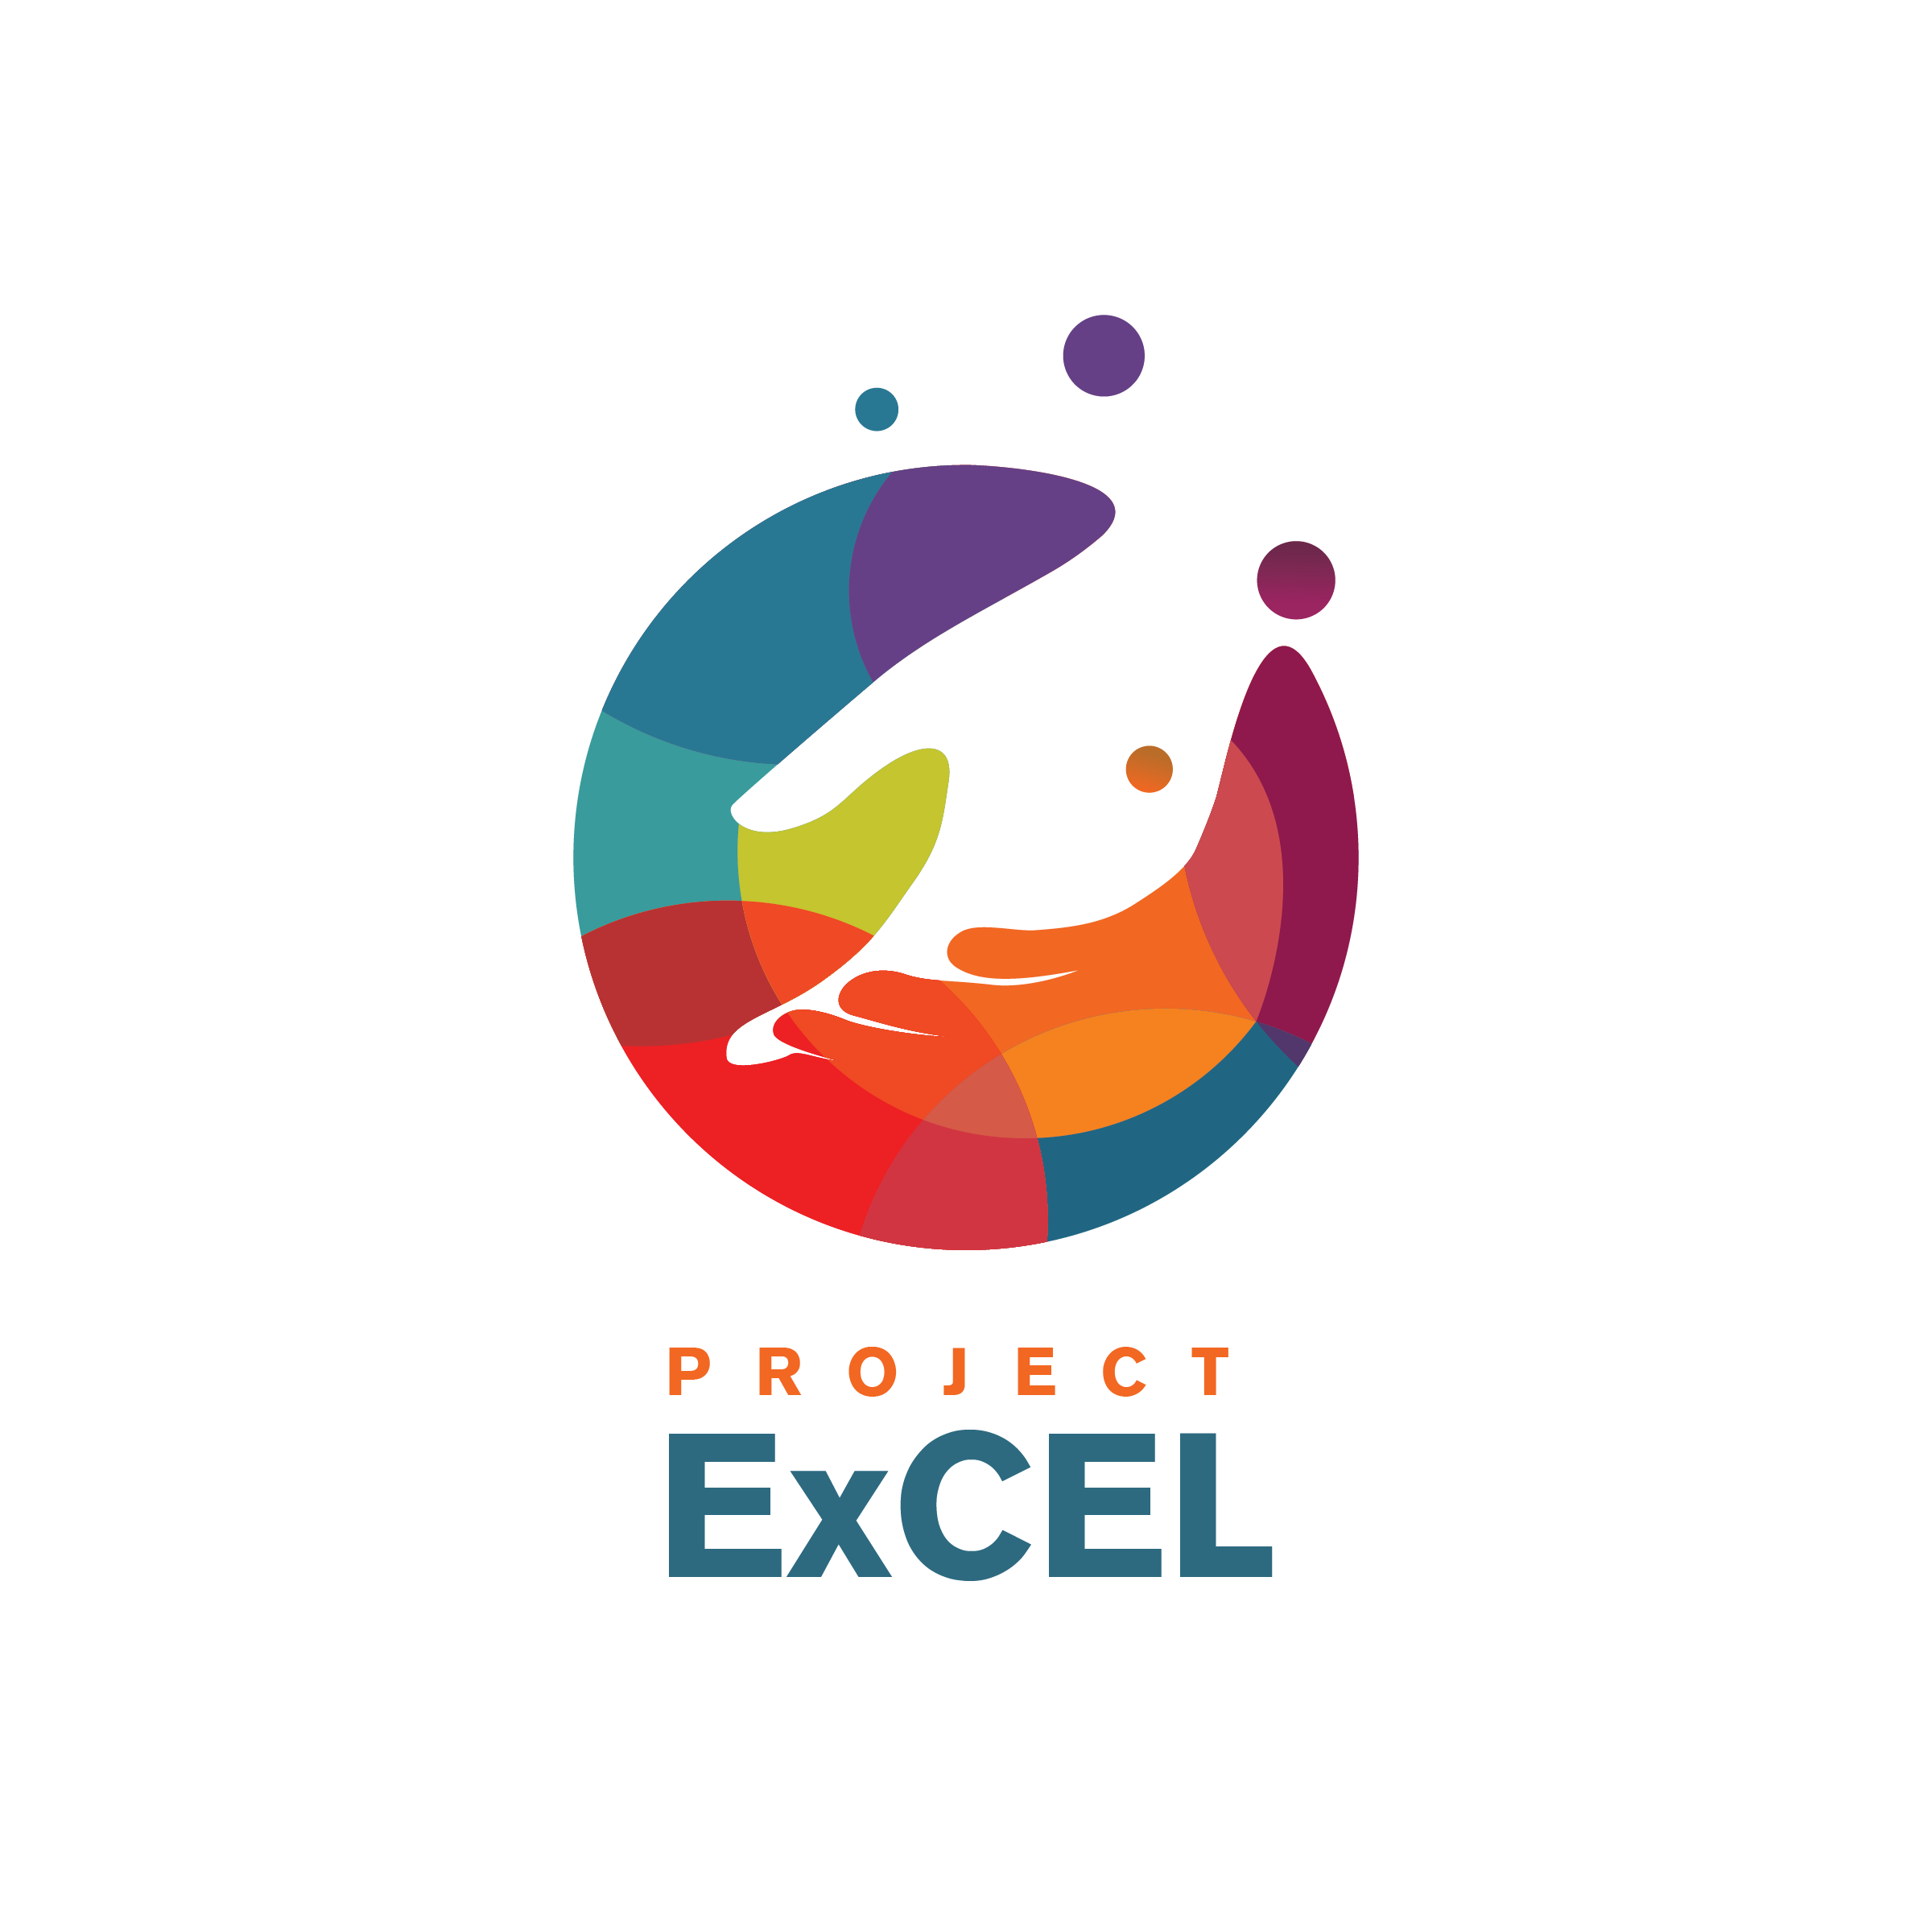 Image of the Project Excel logo, featuring a hand made of negative space amongst red, orange, green, blue, and purple overlapping circles, with the words PROJECT in orange, and ExCEL in blue.